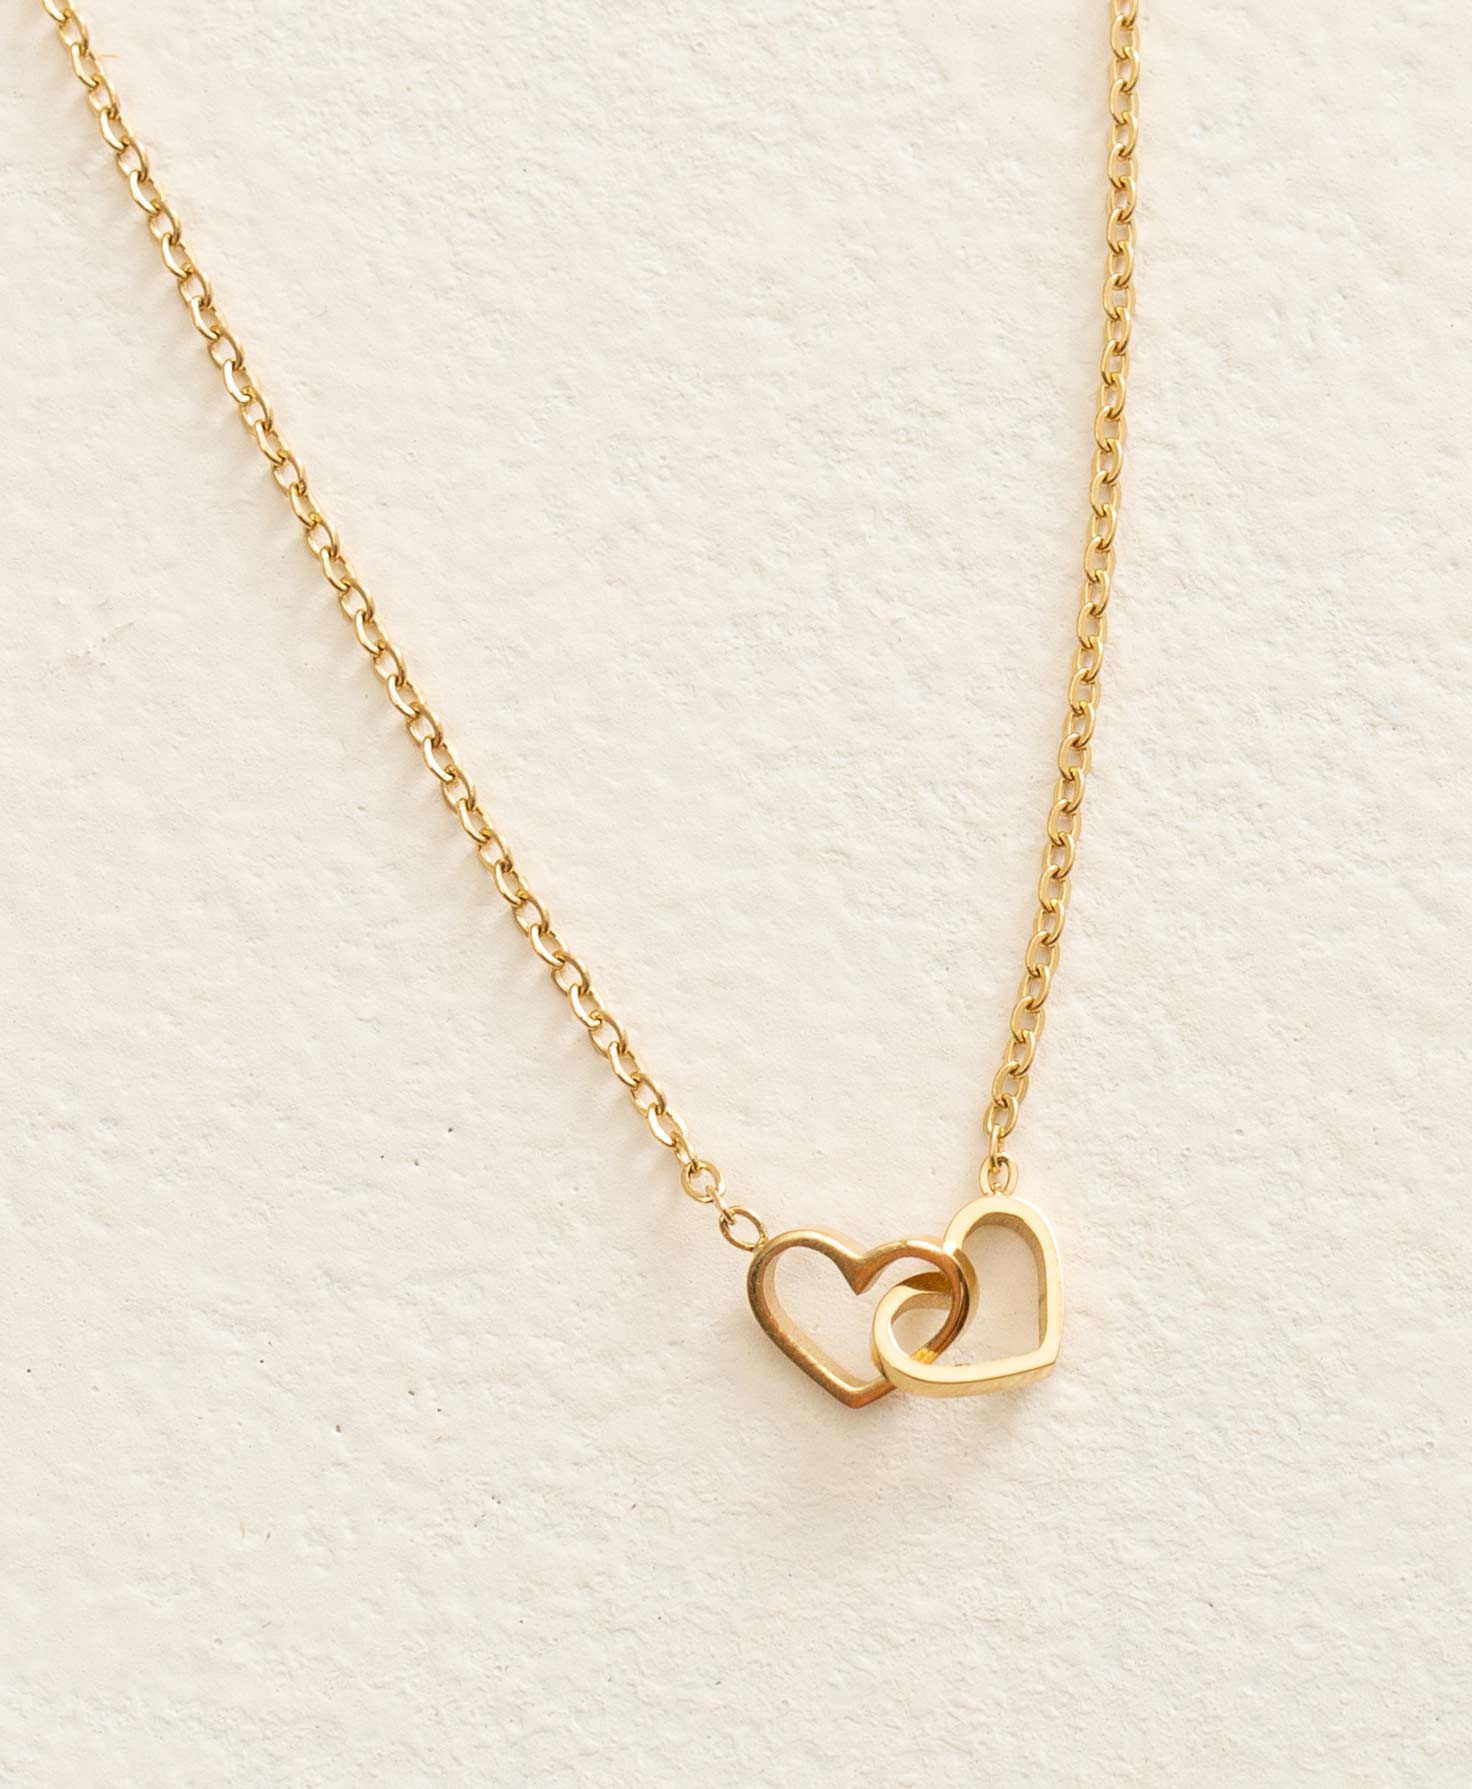 New Simple Cute Gold/Silver Plated Moon Star Heart Necklace